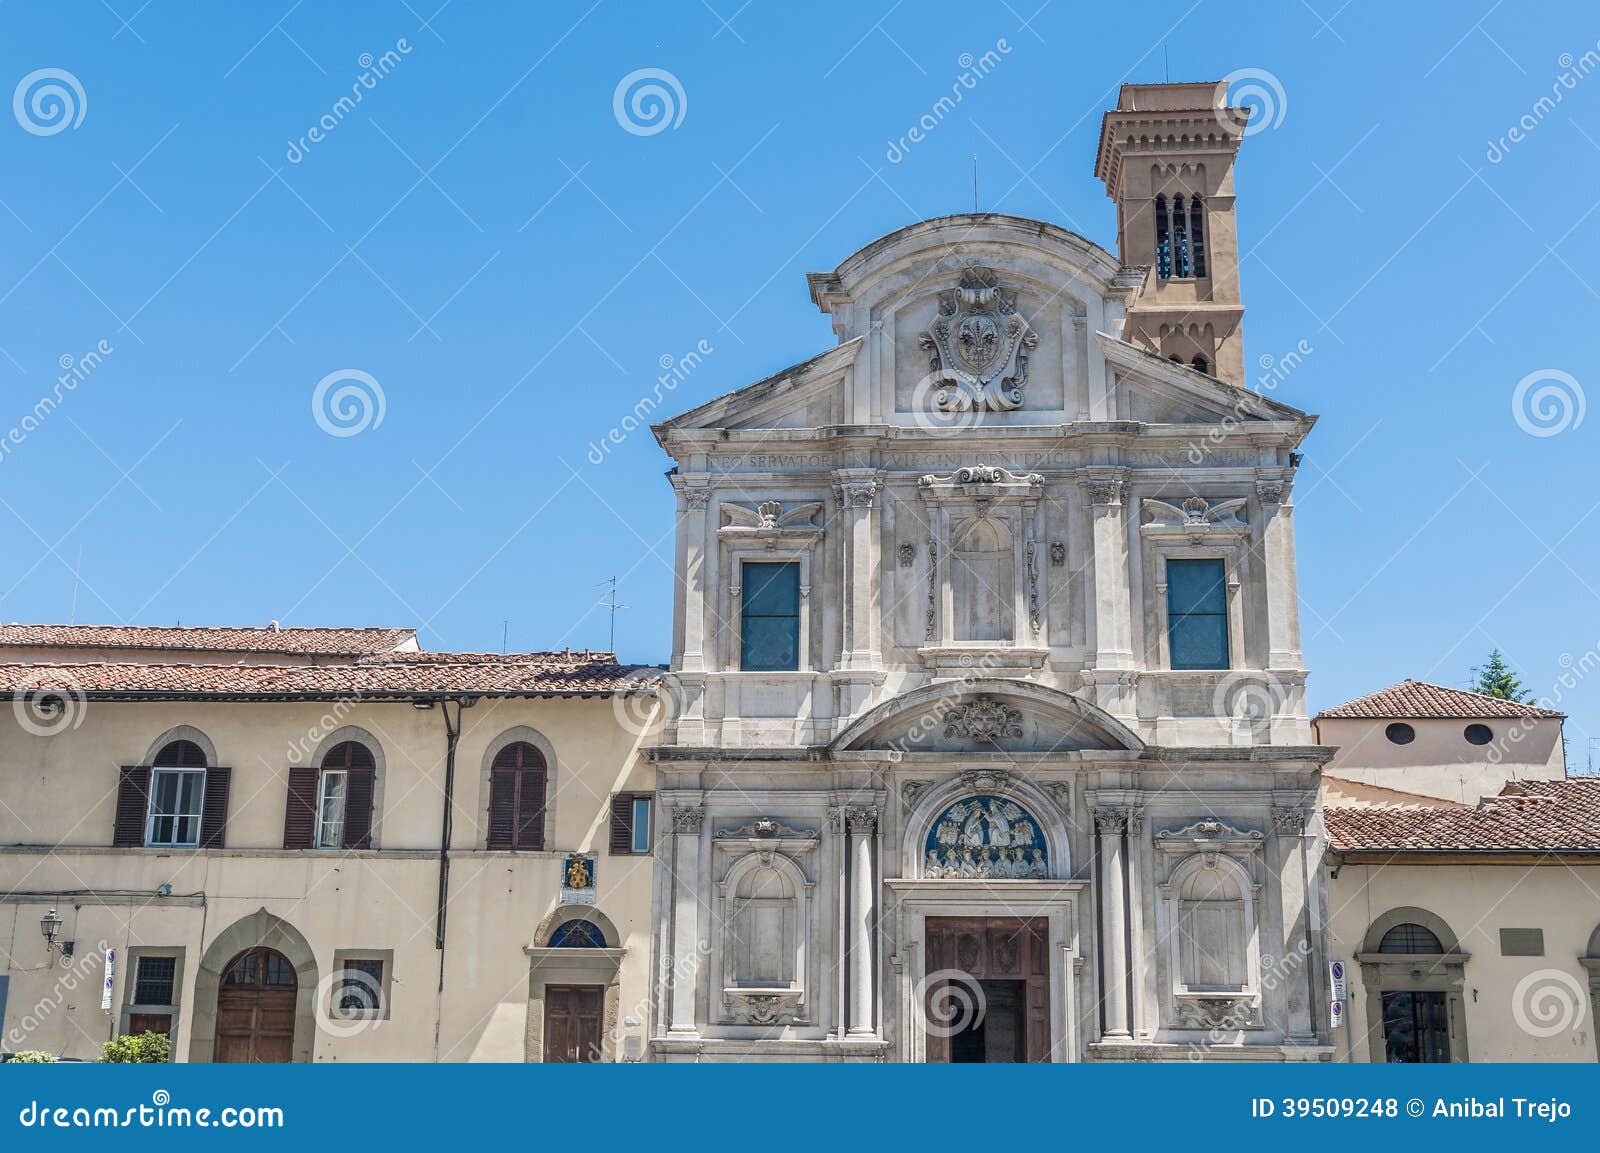 the chiesa di ognissanti, a franciscan church in florence, italy